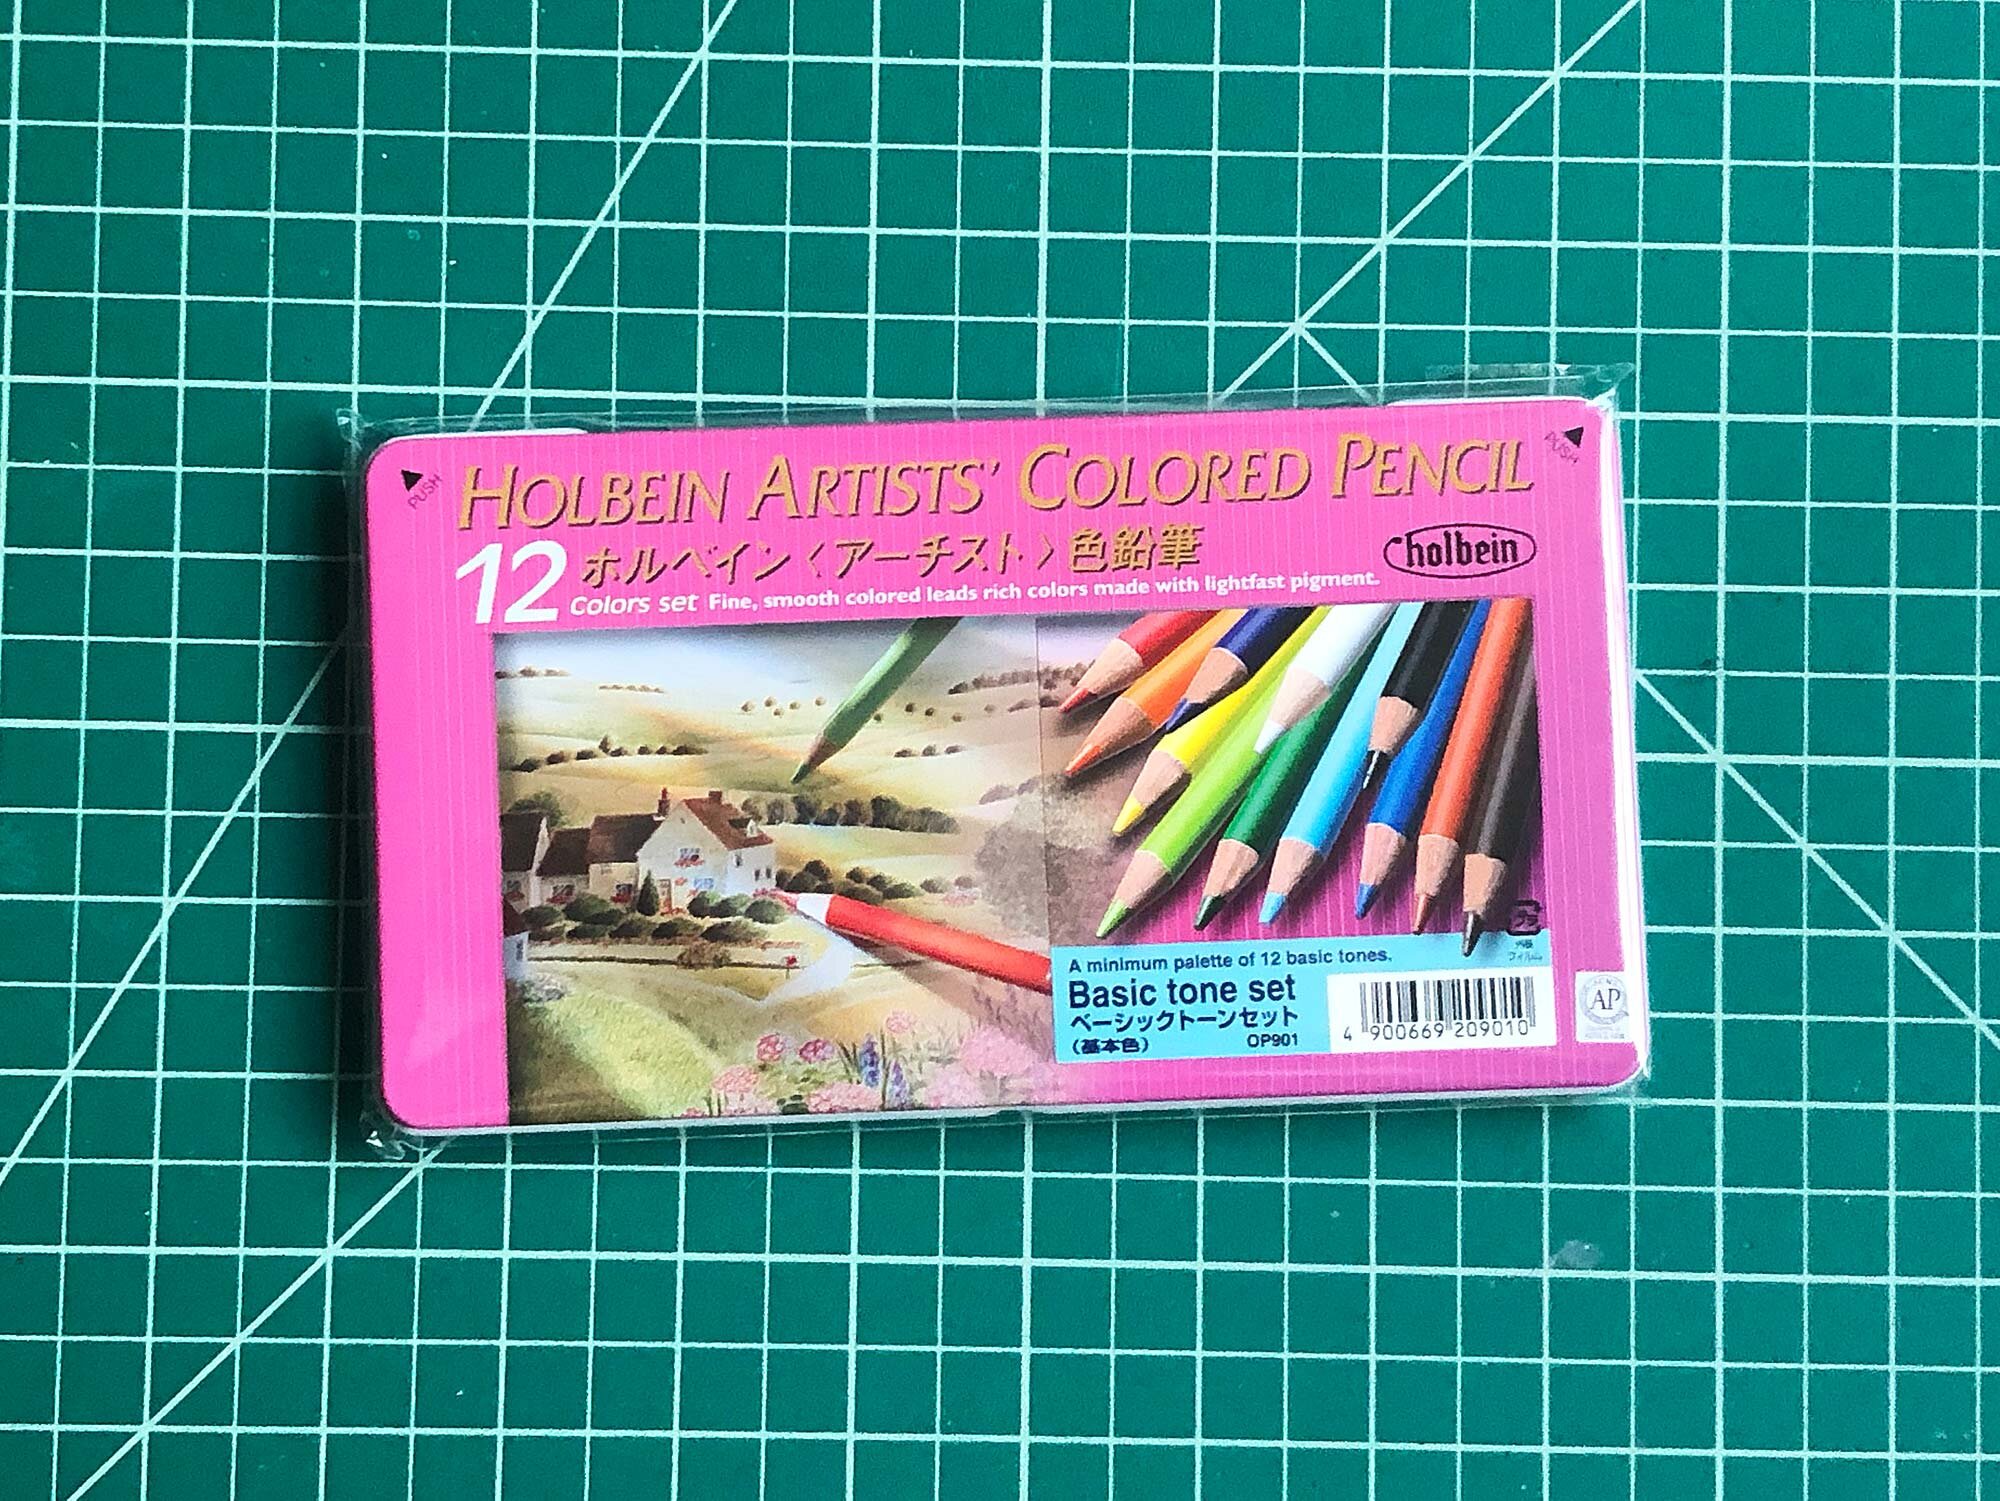 Holbein Artists' Colored Pencils 12 count tin